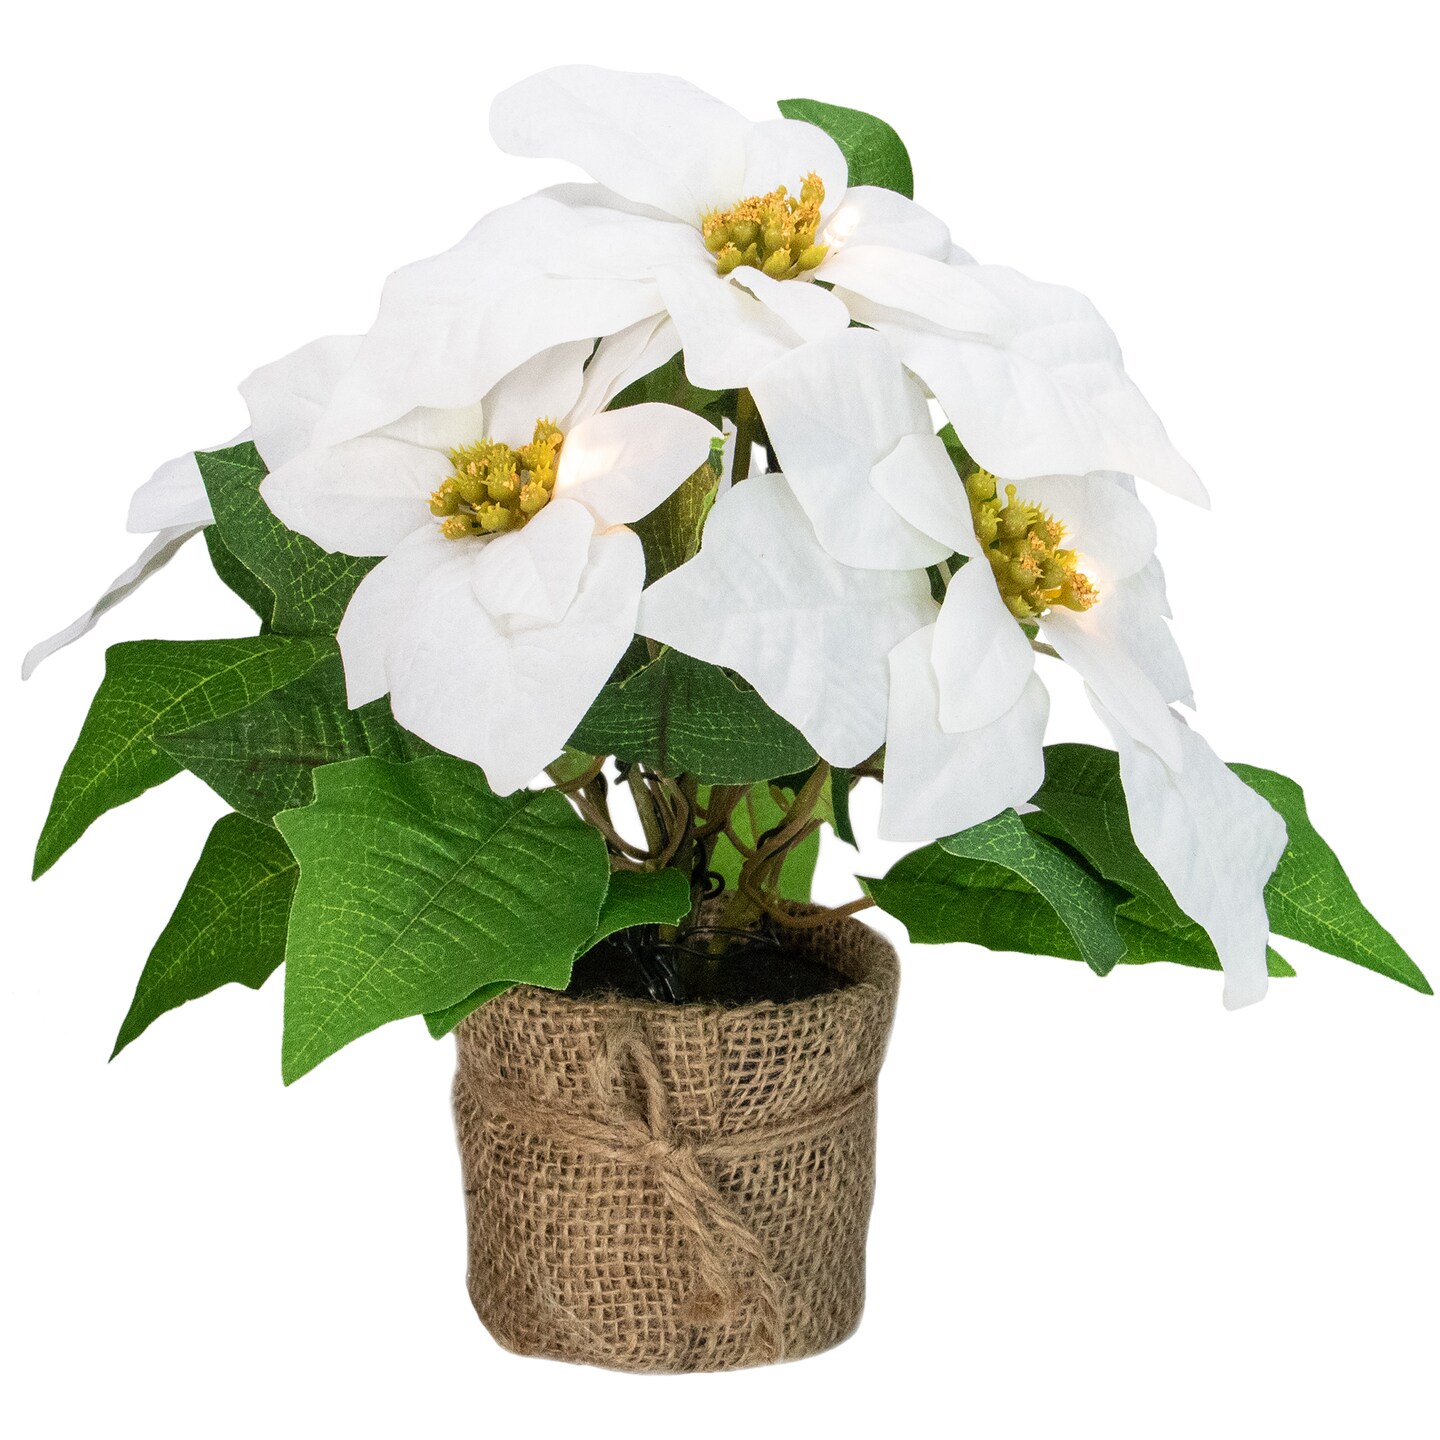  Yilloog Potted Pre Lit Artificial Poinsettia Plant